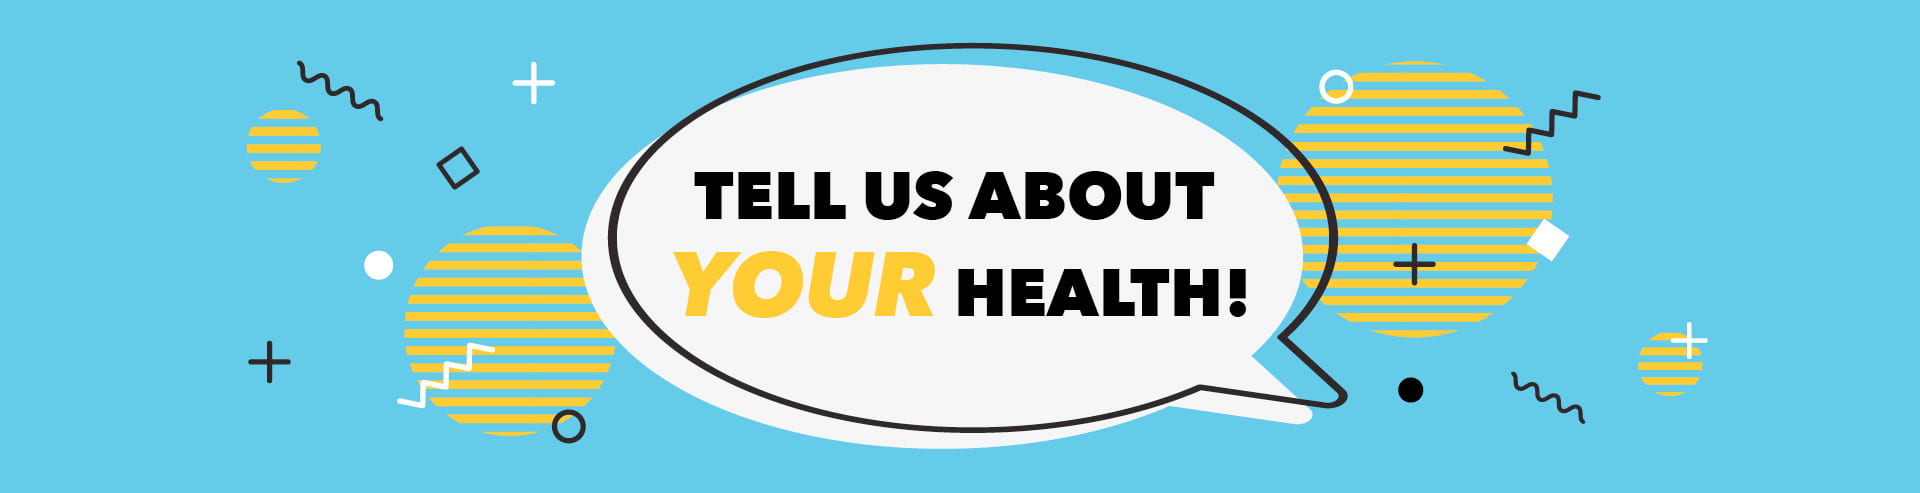 Tell us about your health